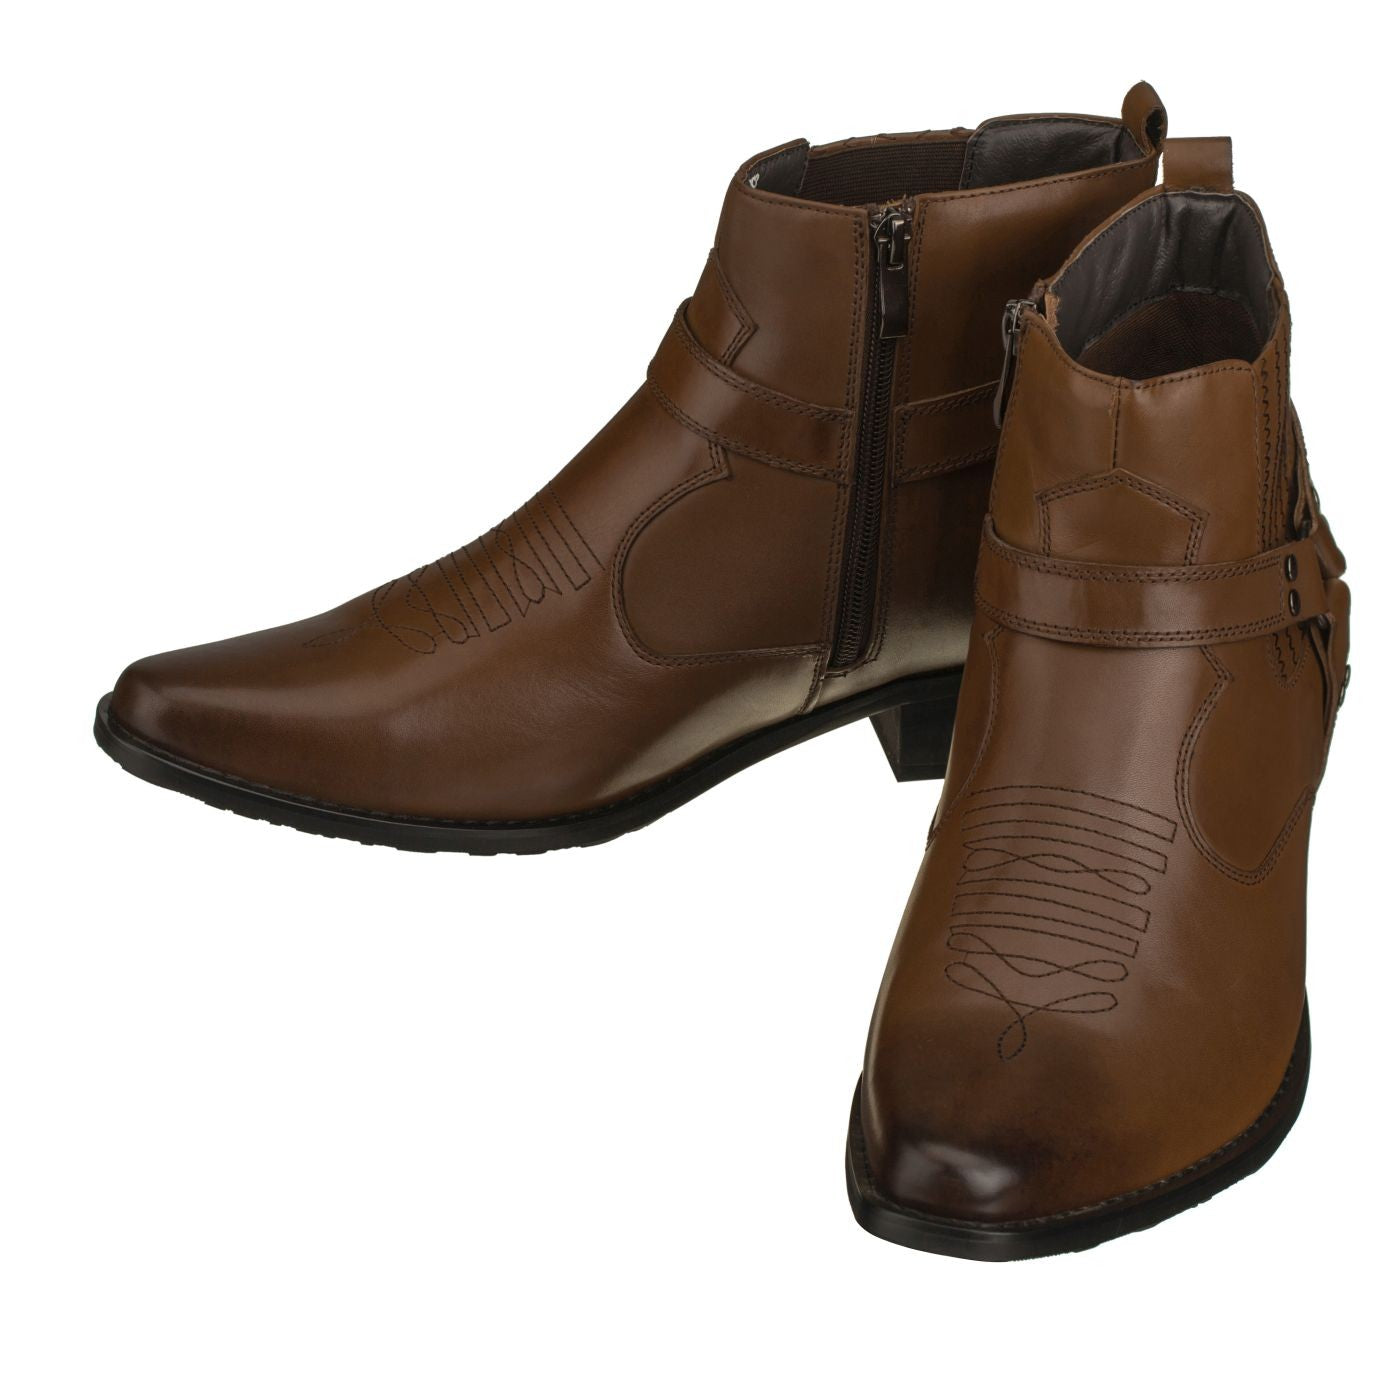 Elevator shoes height increase CALTO - T8113 - 3.3 Inches Taller (Dark Brown) - Zipper Boots